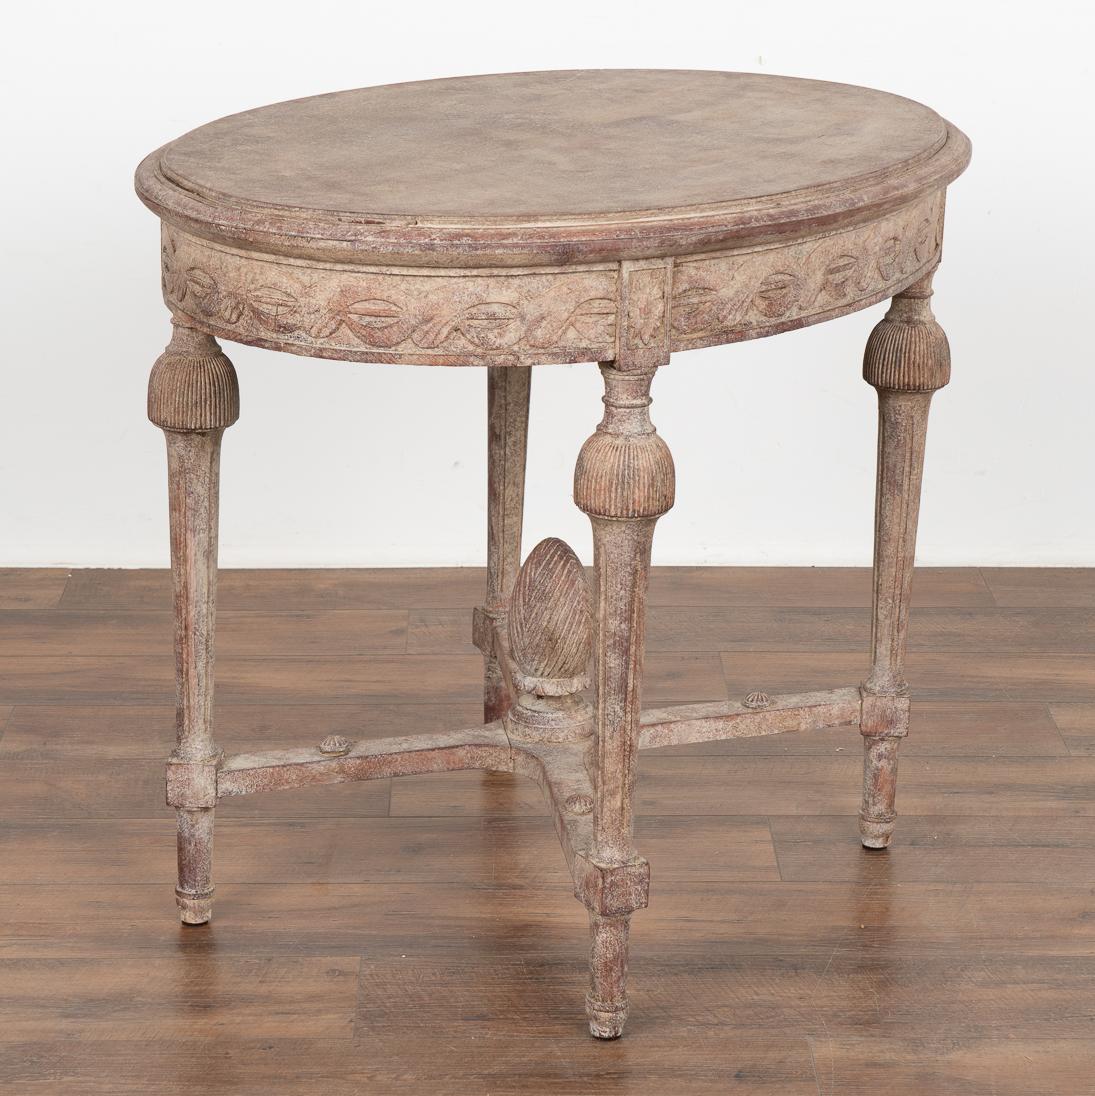 Antique Oval Painted Side Table, Sweden circa 1850-70 For Sale 6